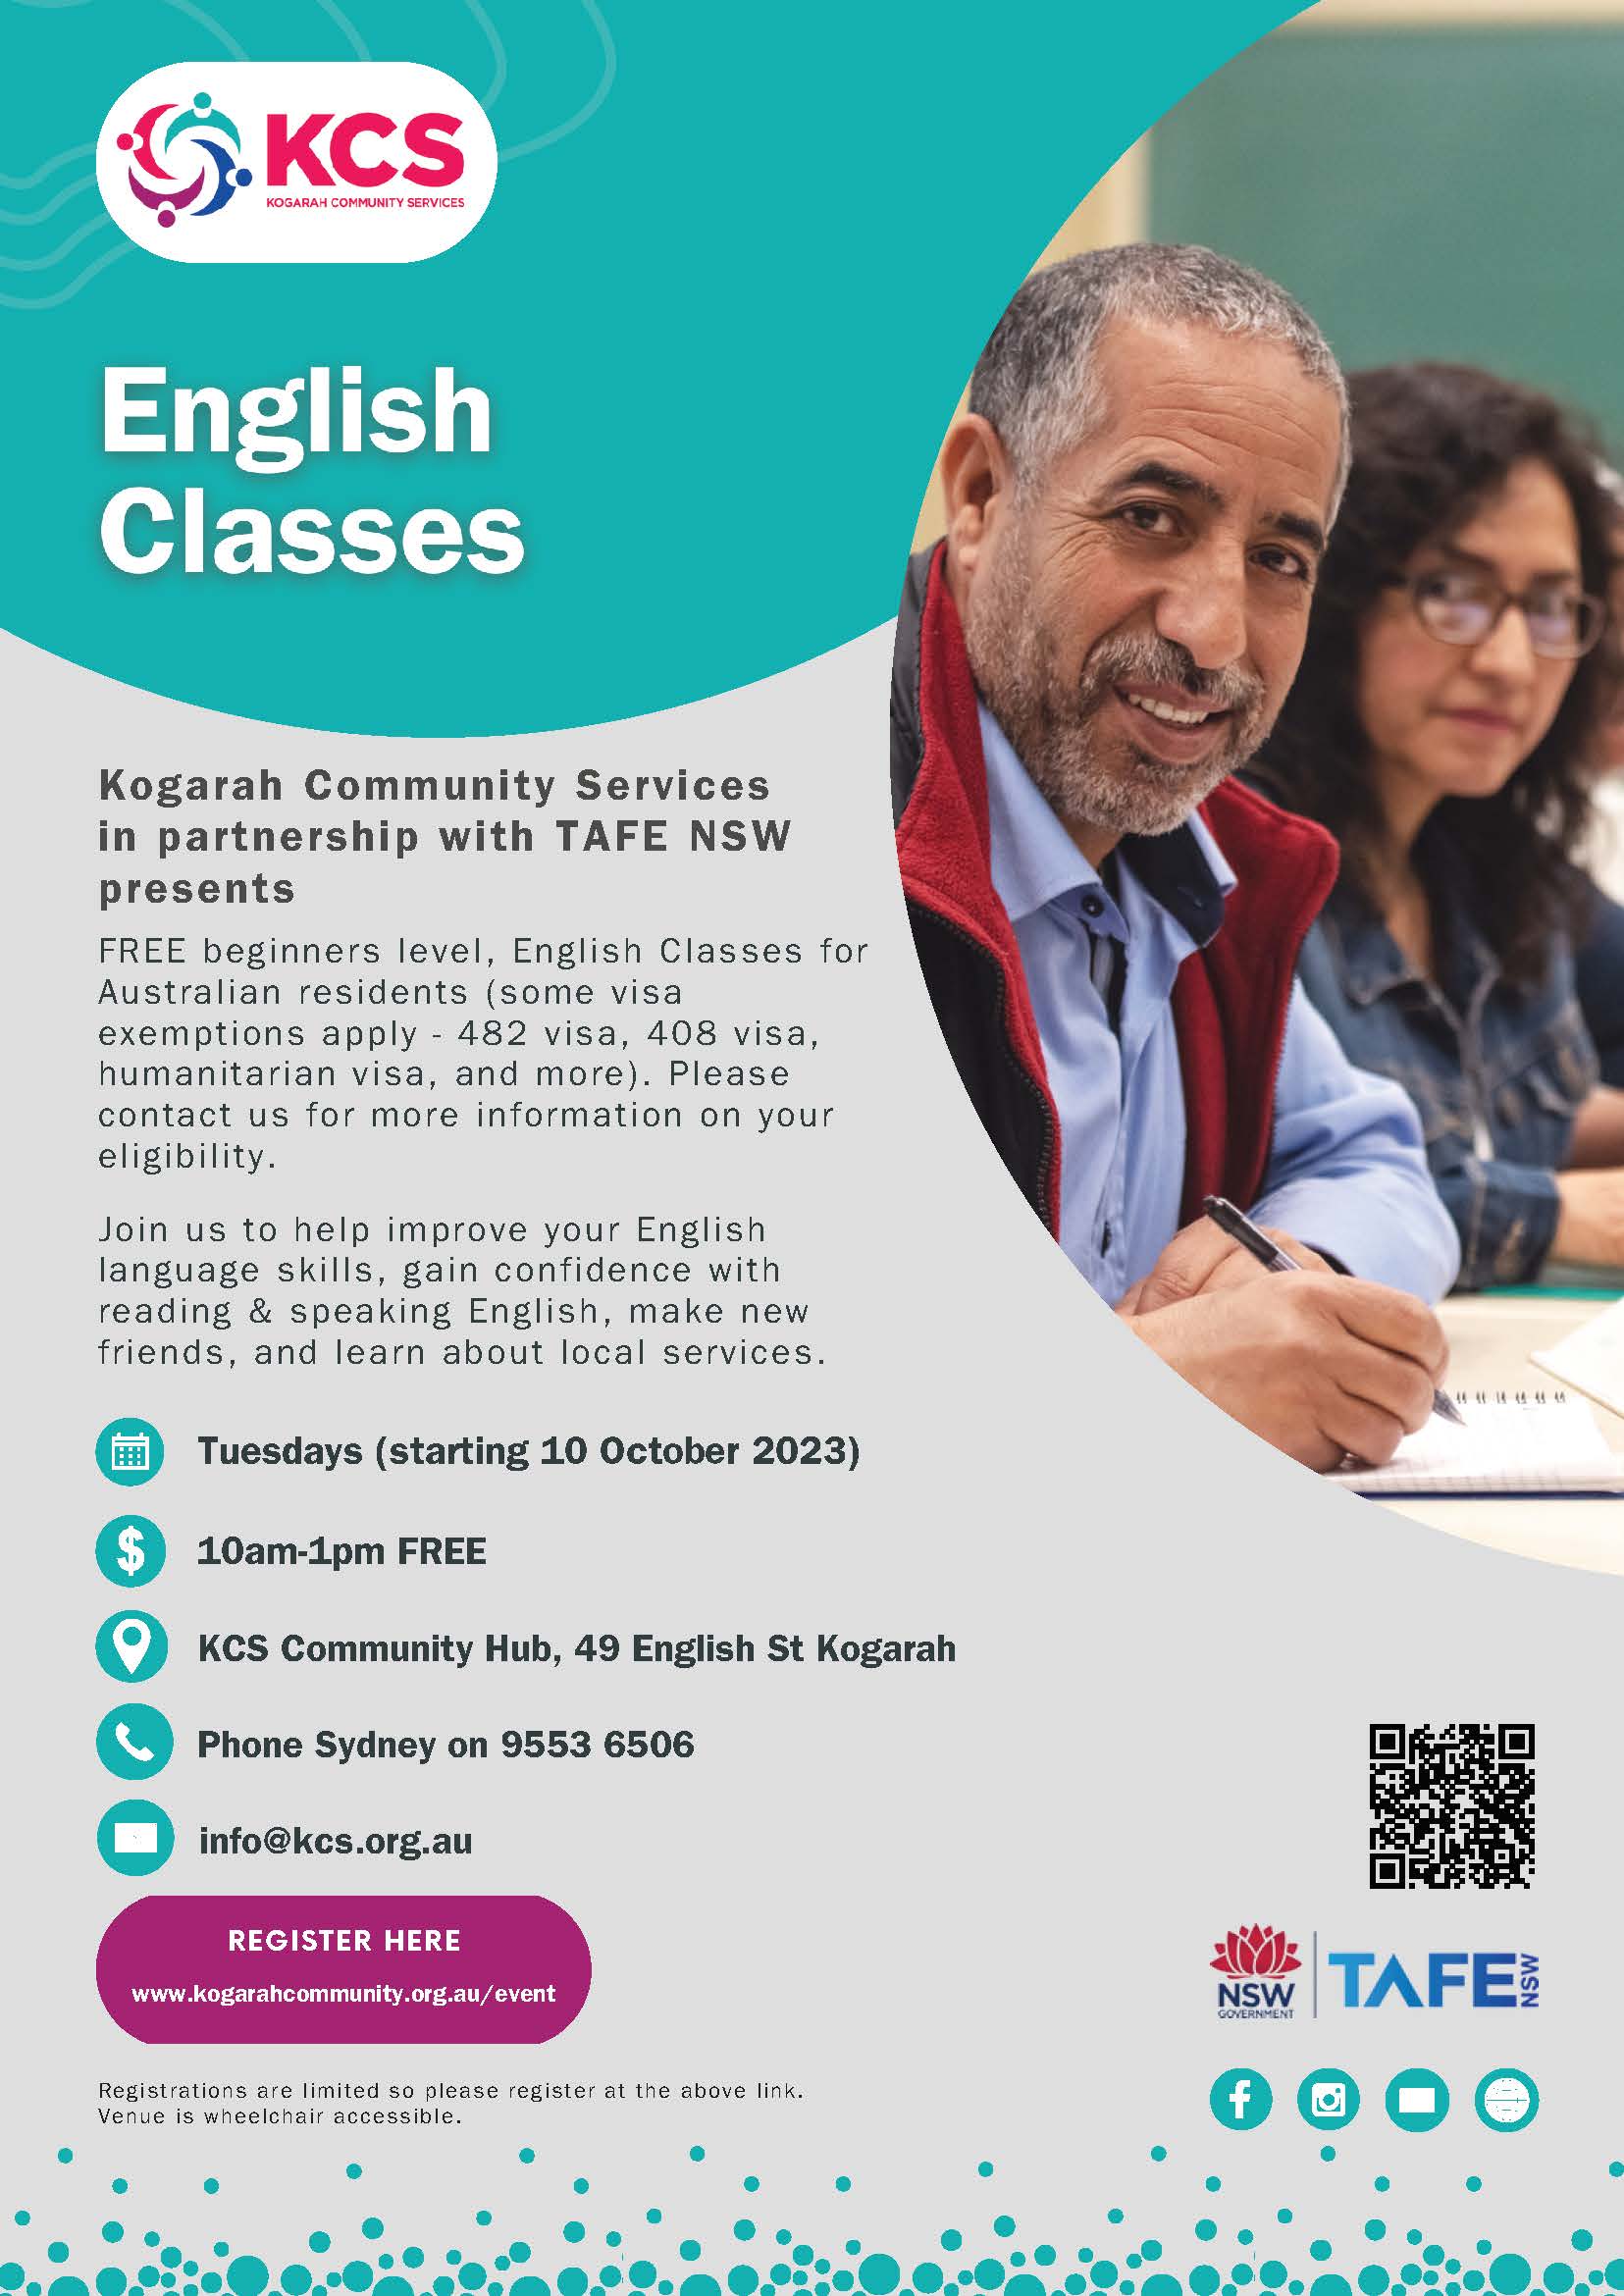 English Classes for Beginners (Term 4 starting 10/10/23)